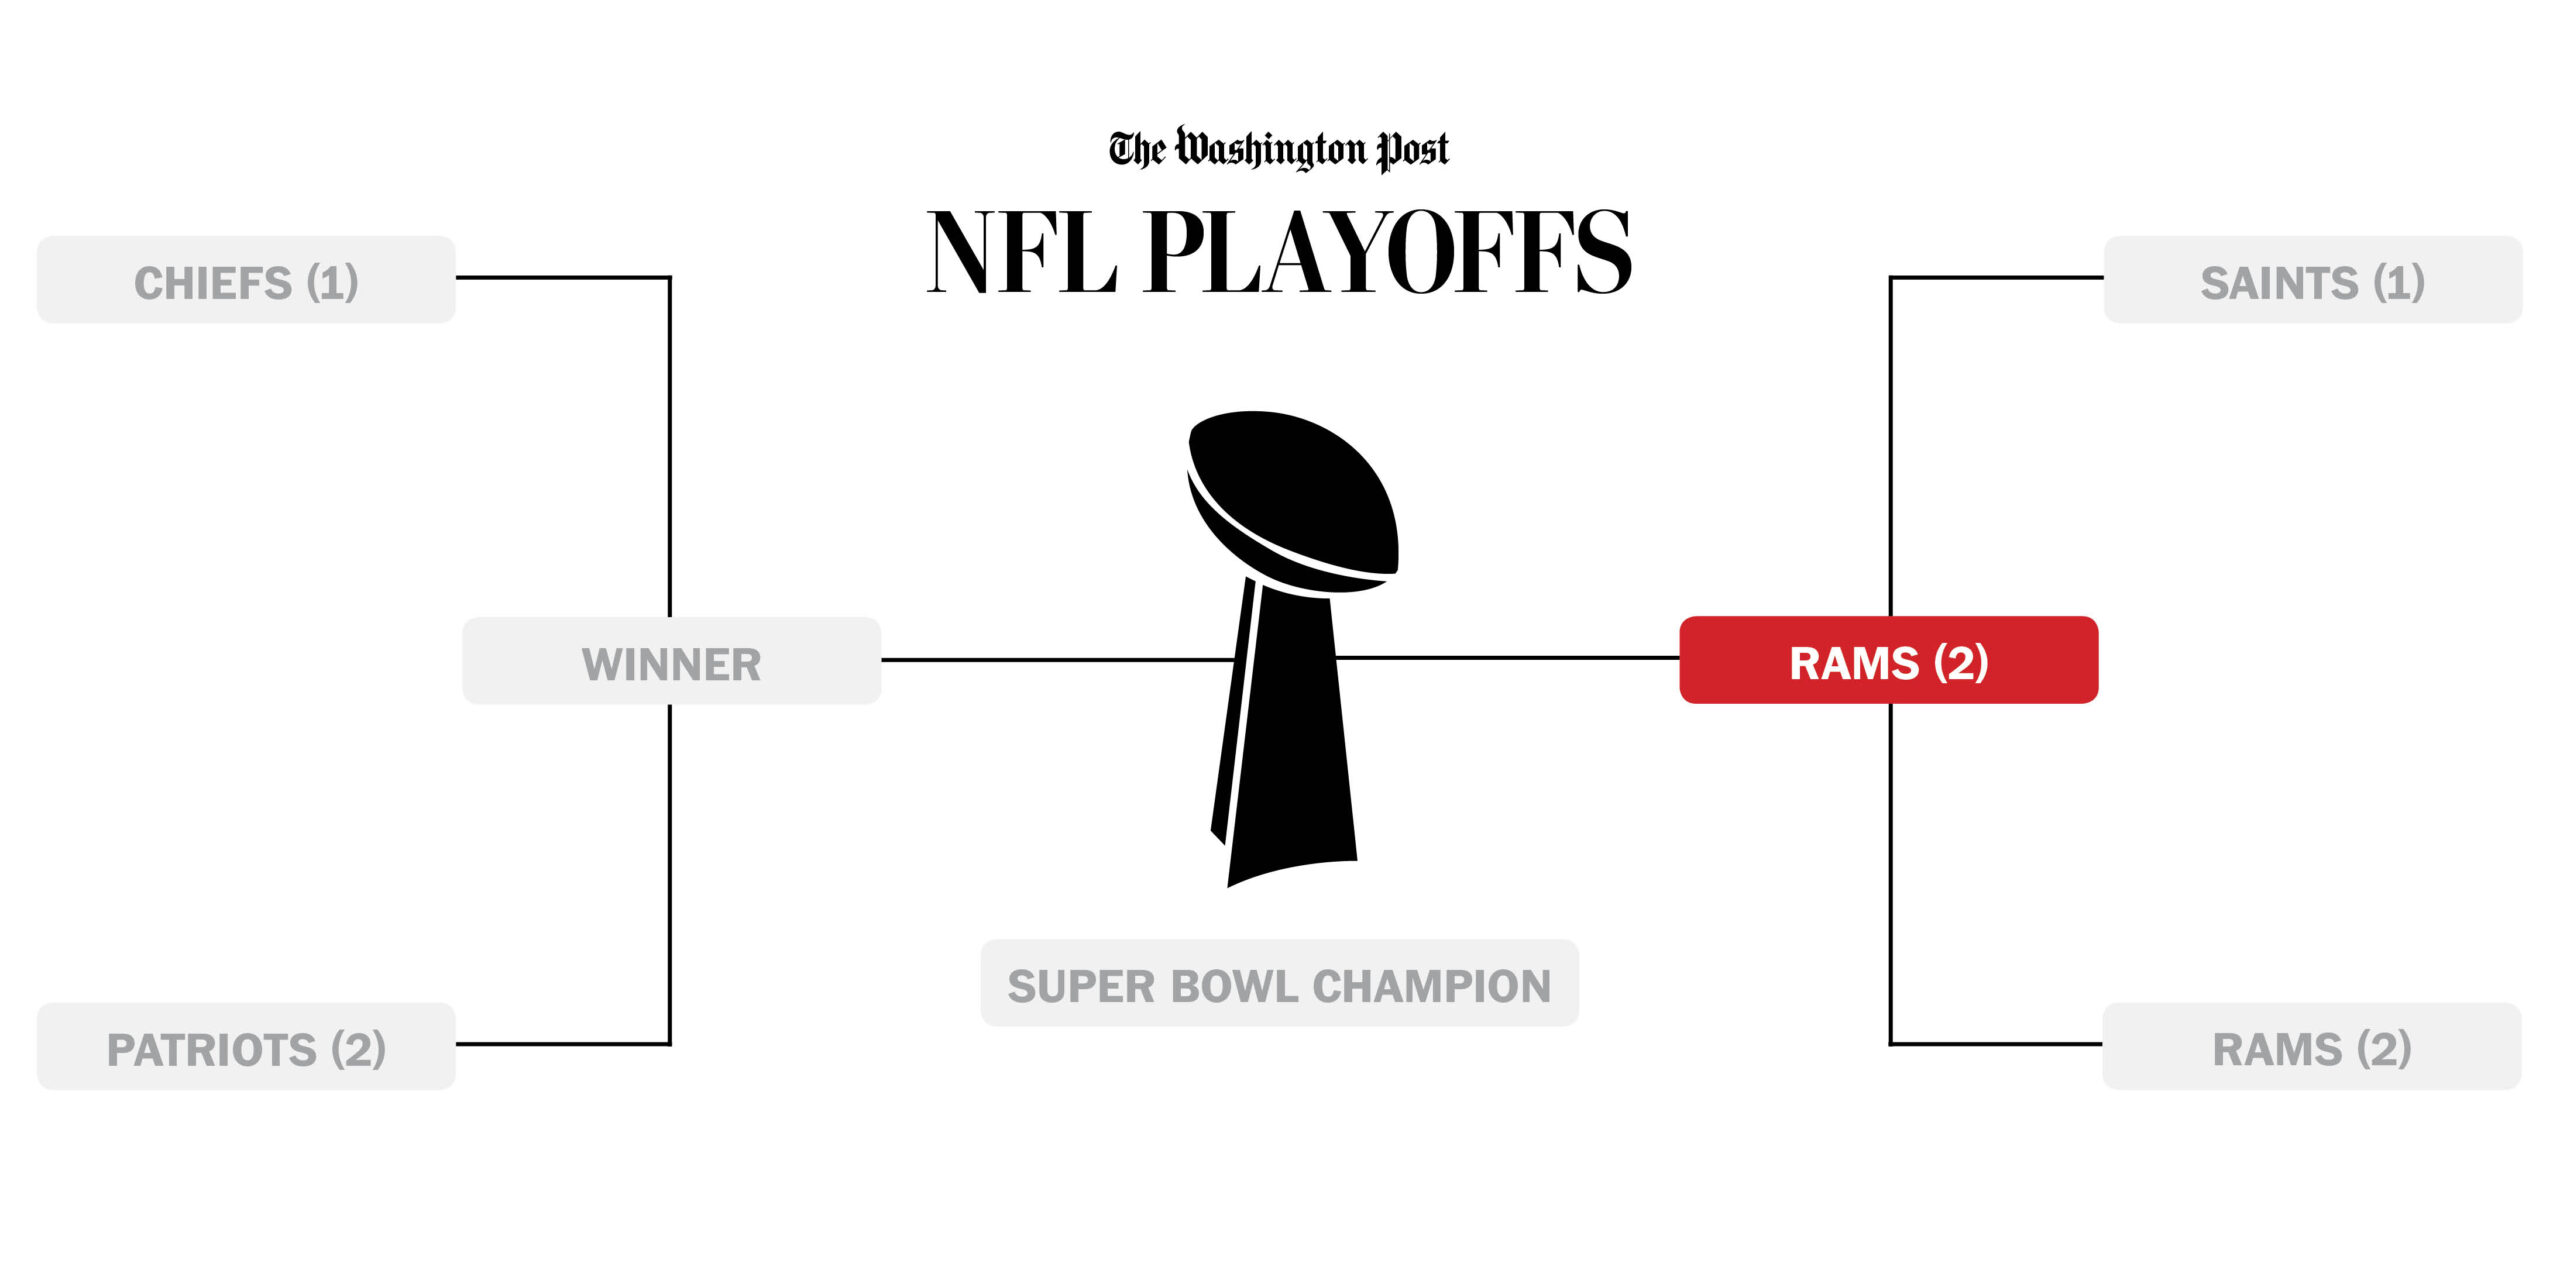 Who Will Play In The Super Bowl? - The Washington Post